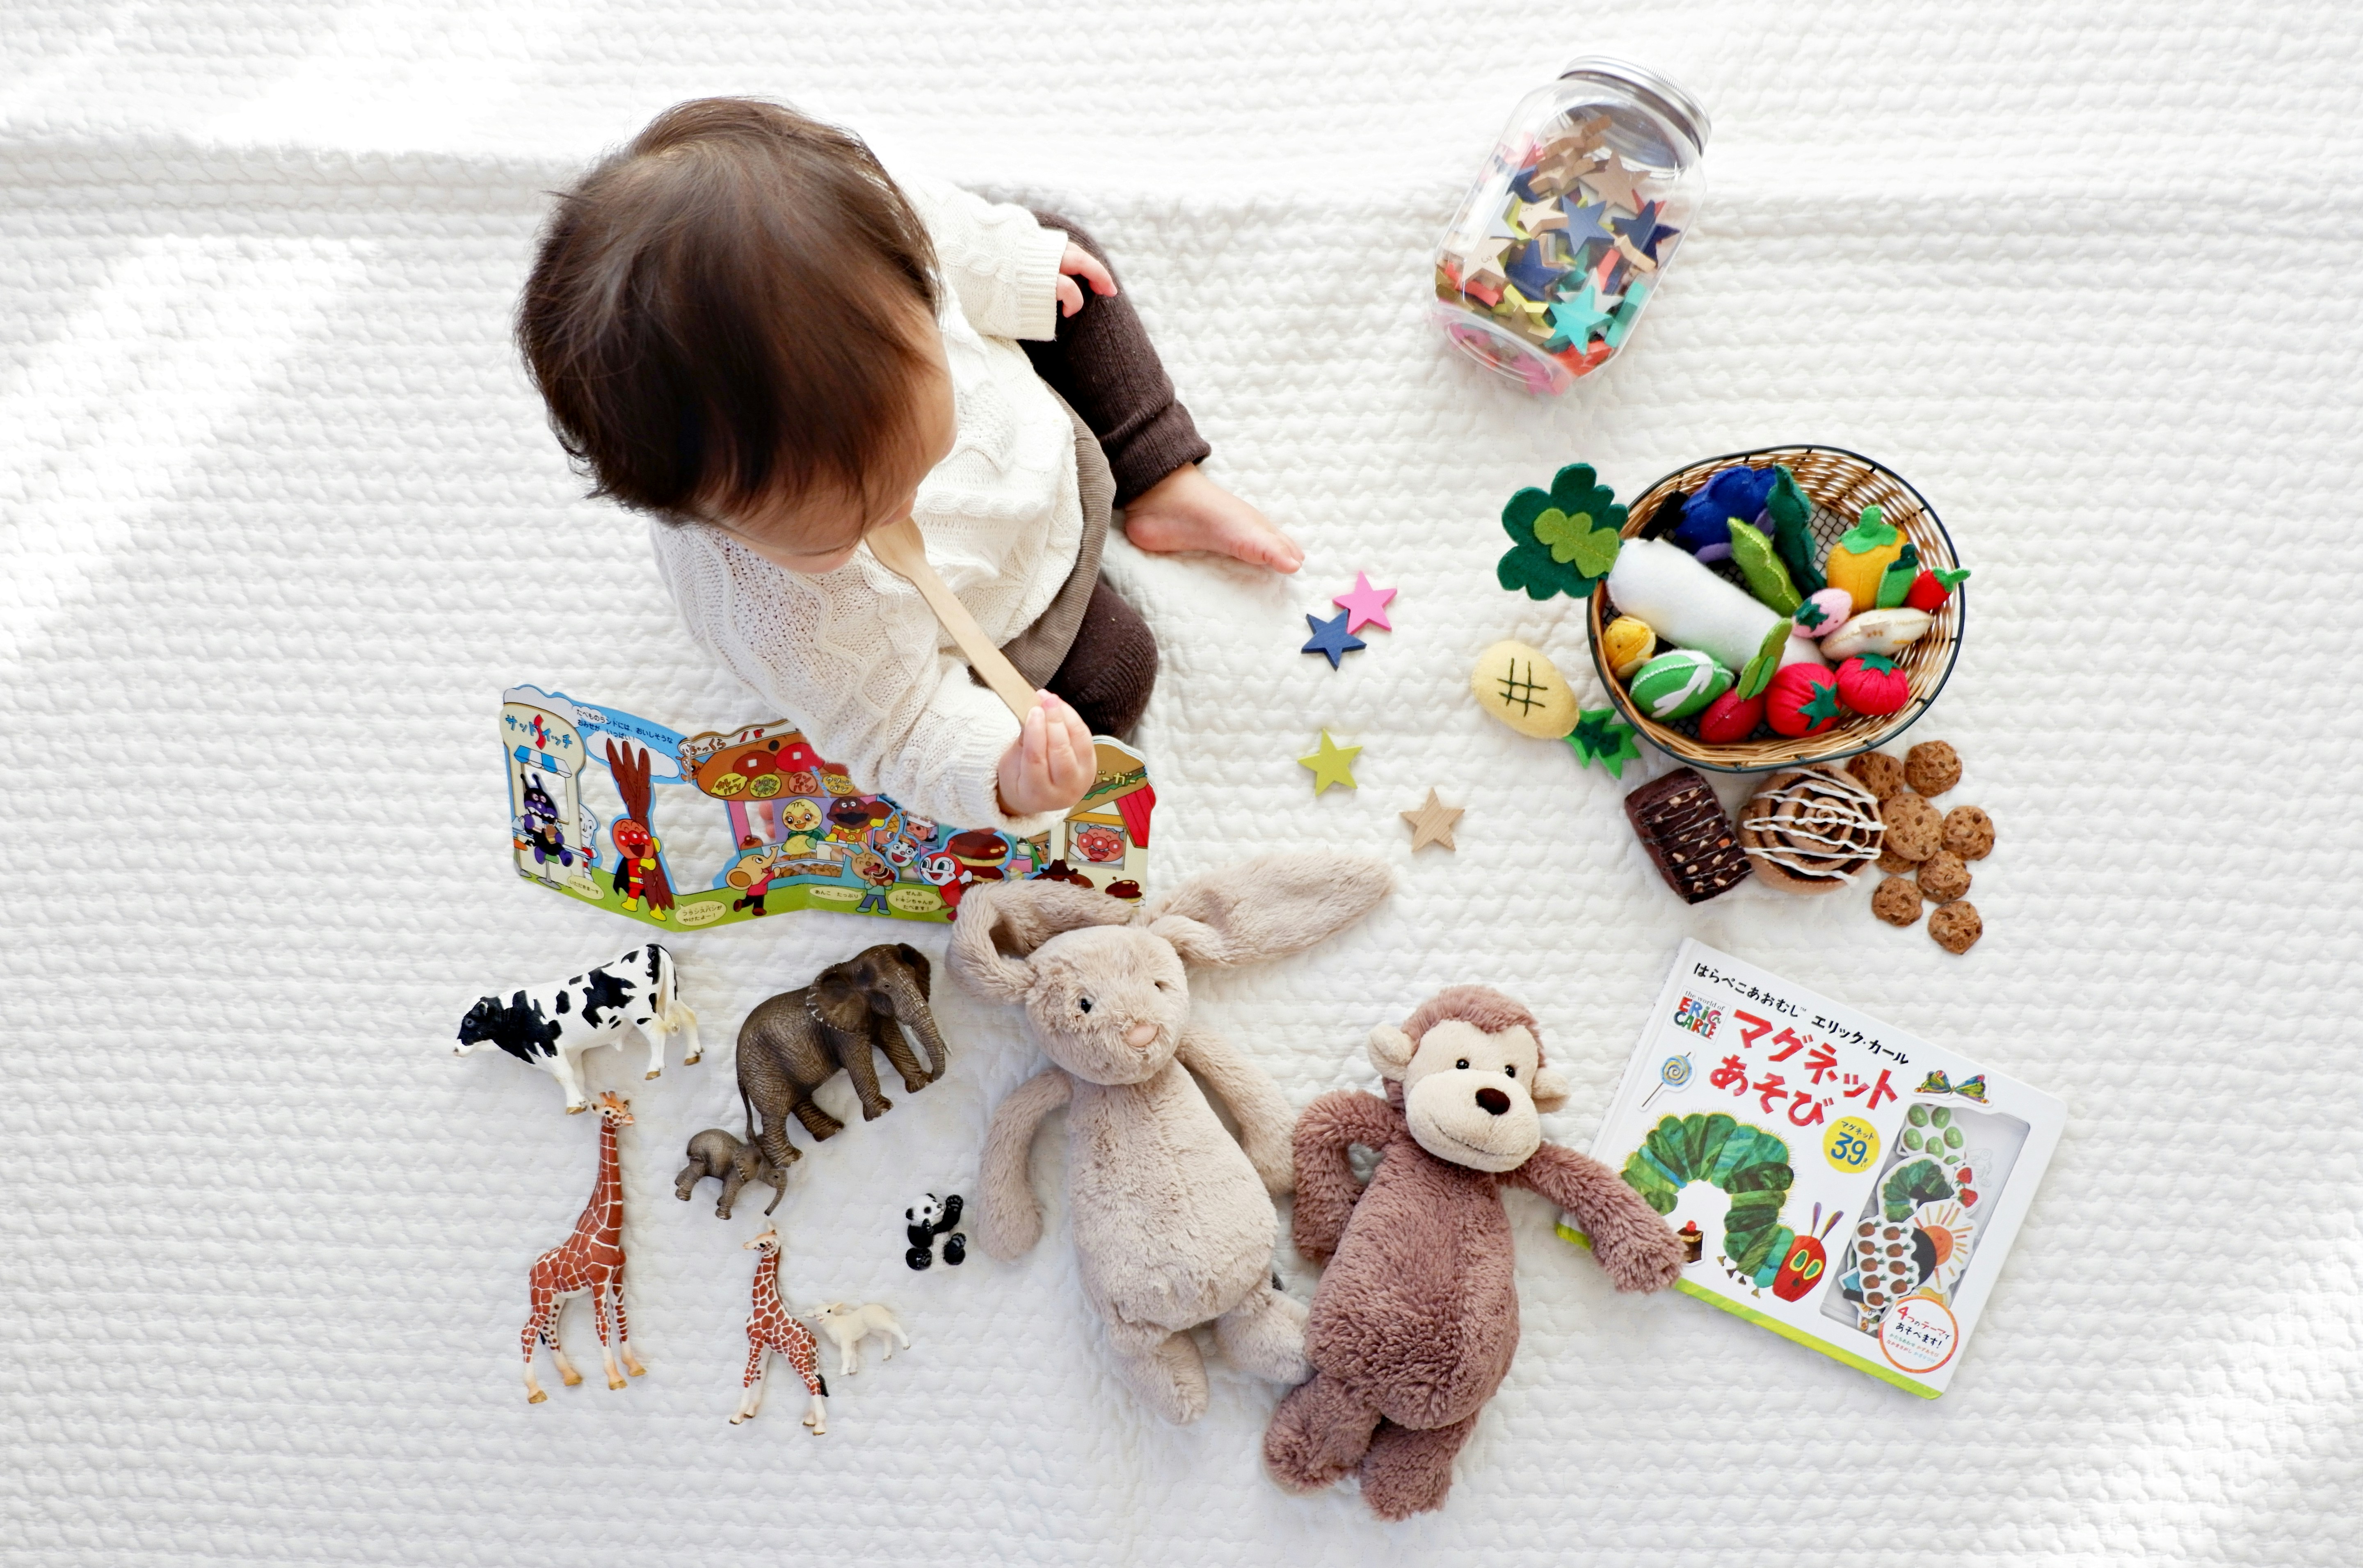 Baby on a rug surrounded by toys